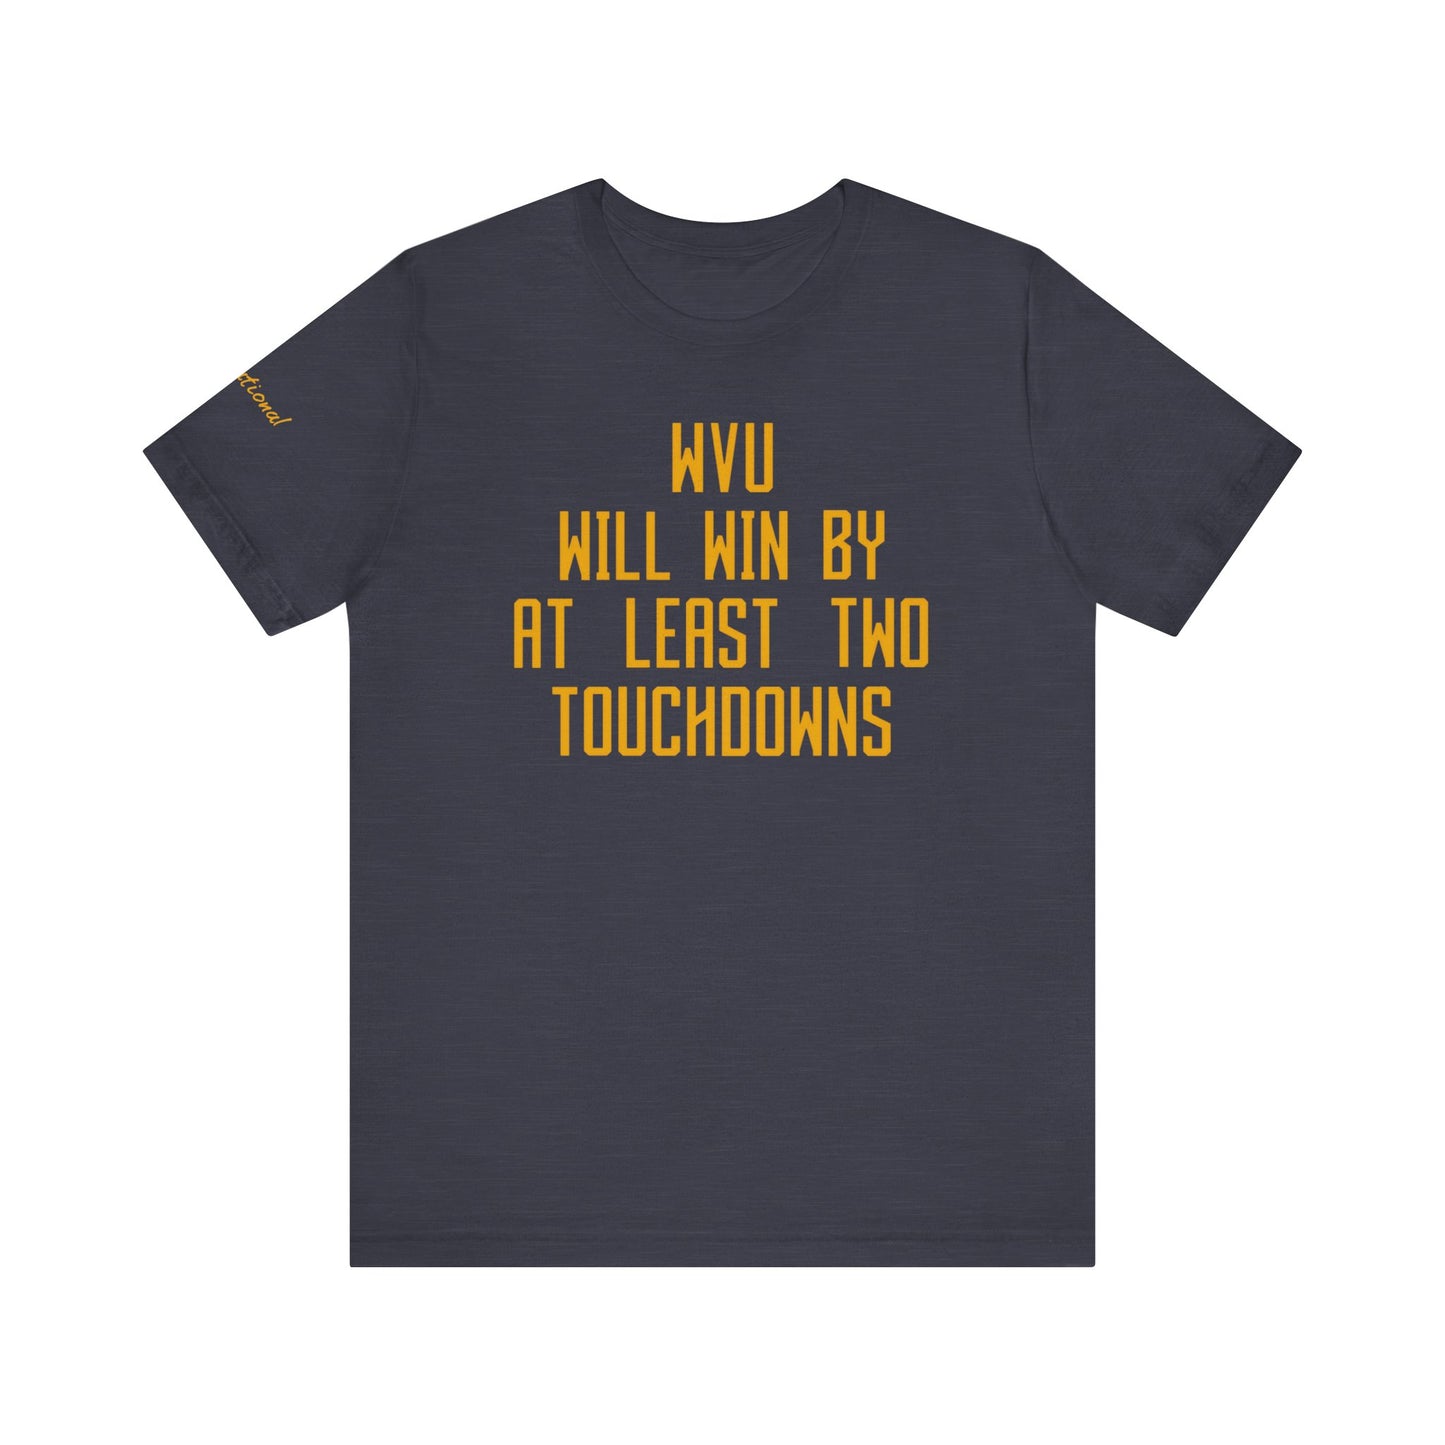 Two Touchdowns Tee